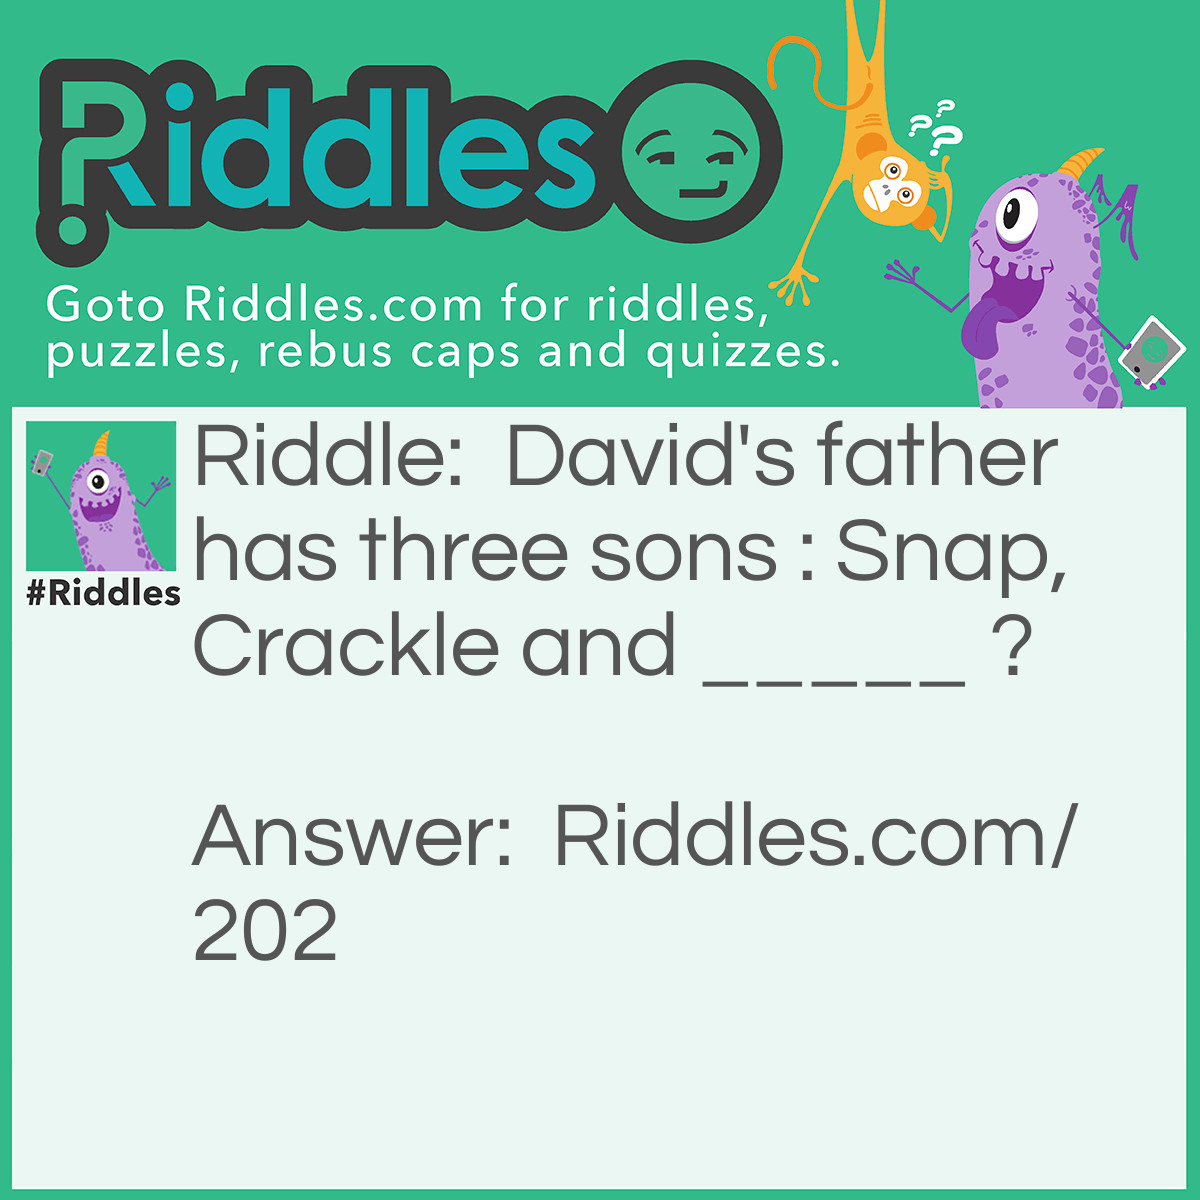 Riddle: David's father has three sons: Snap, Crackle, and _____? Answer: David.